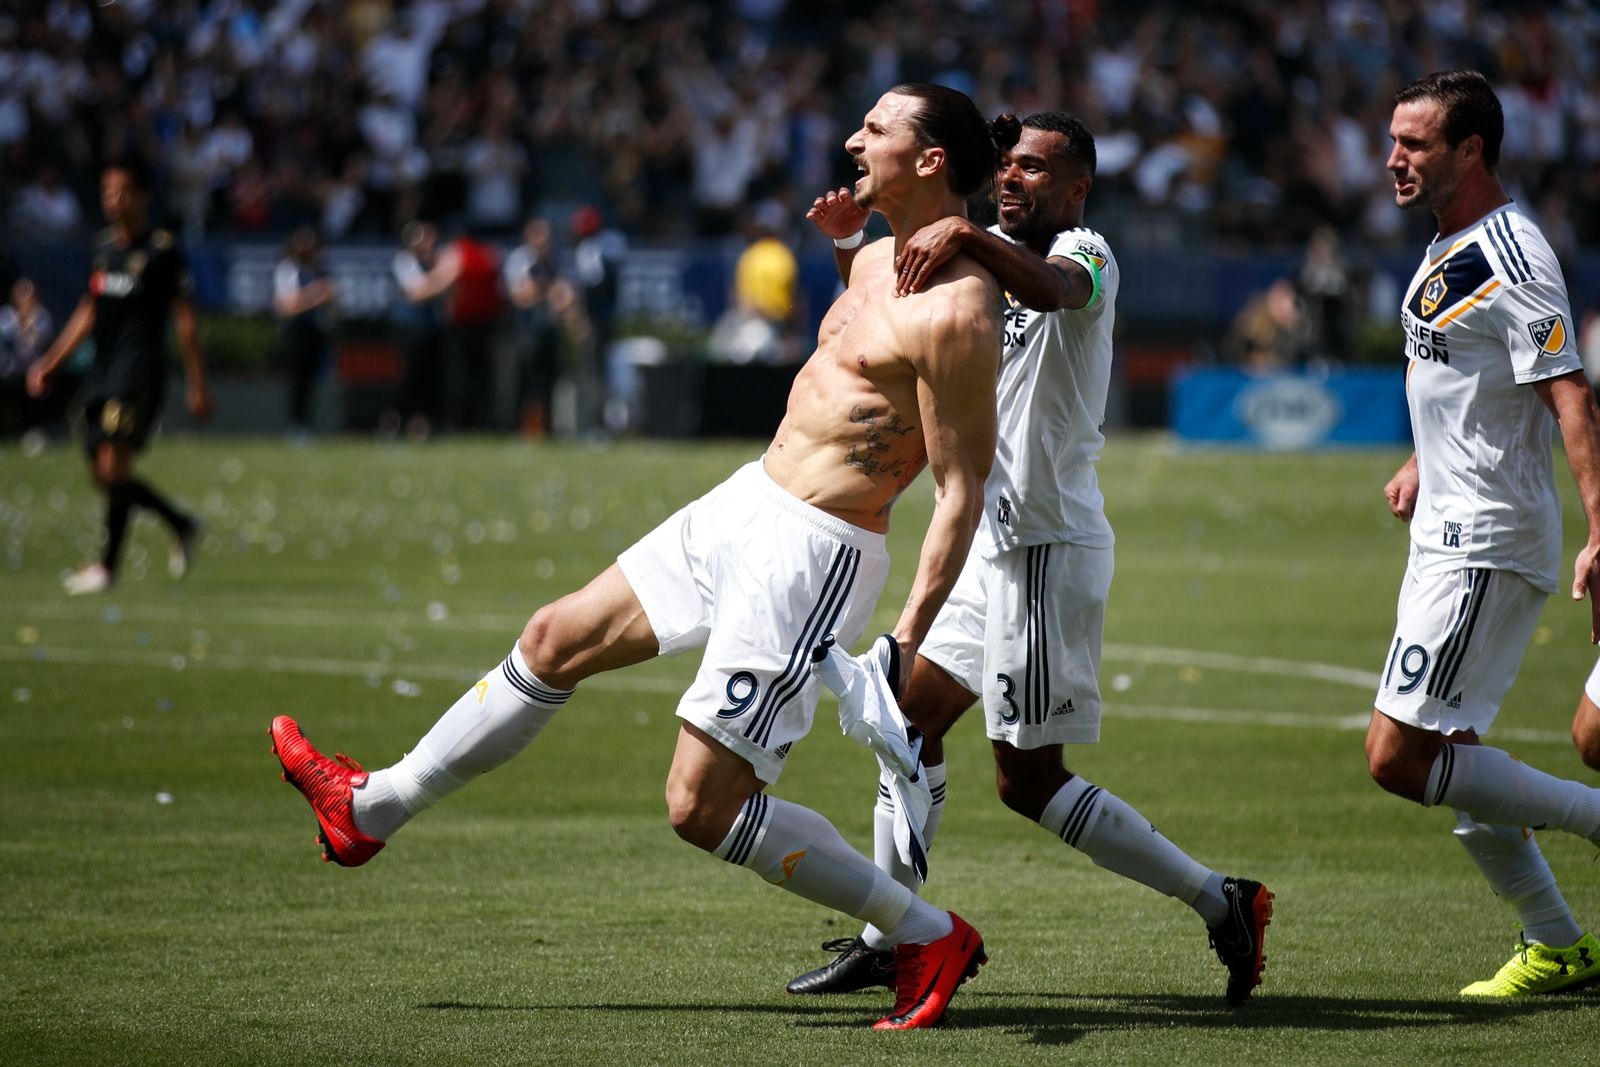 Los Angeles Galaxy's Zlatan Ibrahimovic, left, of Sweden, celebrates his debut goal with Ashley Cole and Chris Pontius, right, during the second half of an MLS soccer match against the Los Angeles FC Saturday, March 31, 2018, in Carson, Calif. The Galaxy won 4-3. (AP Photo/Jae C. Hong)